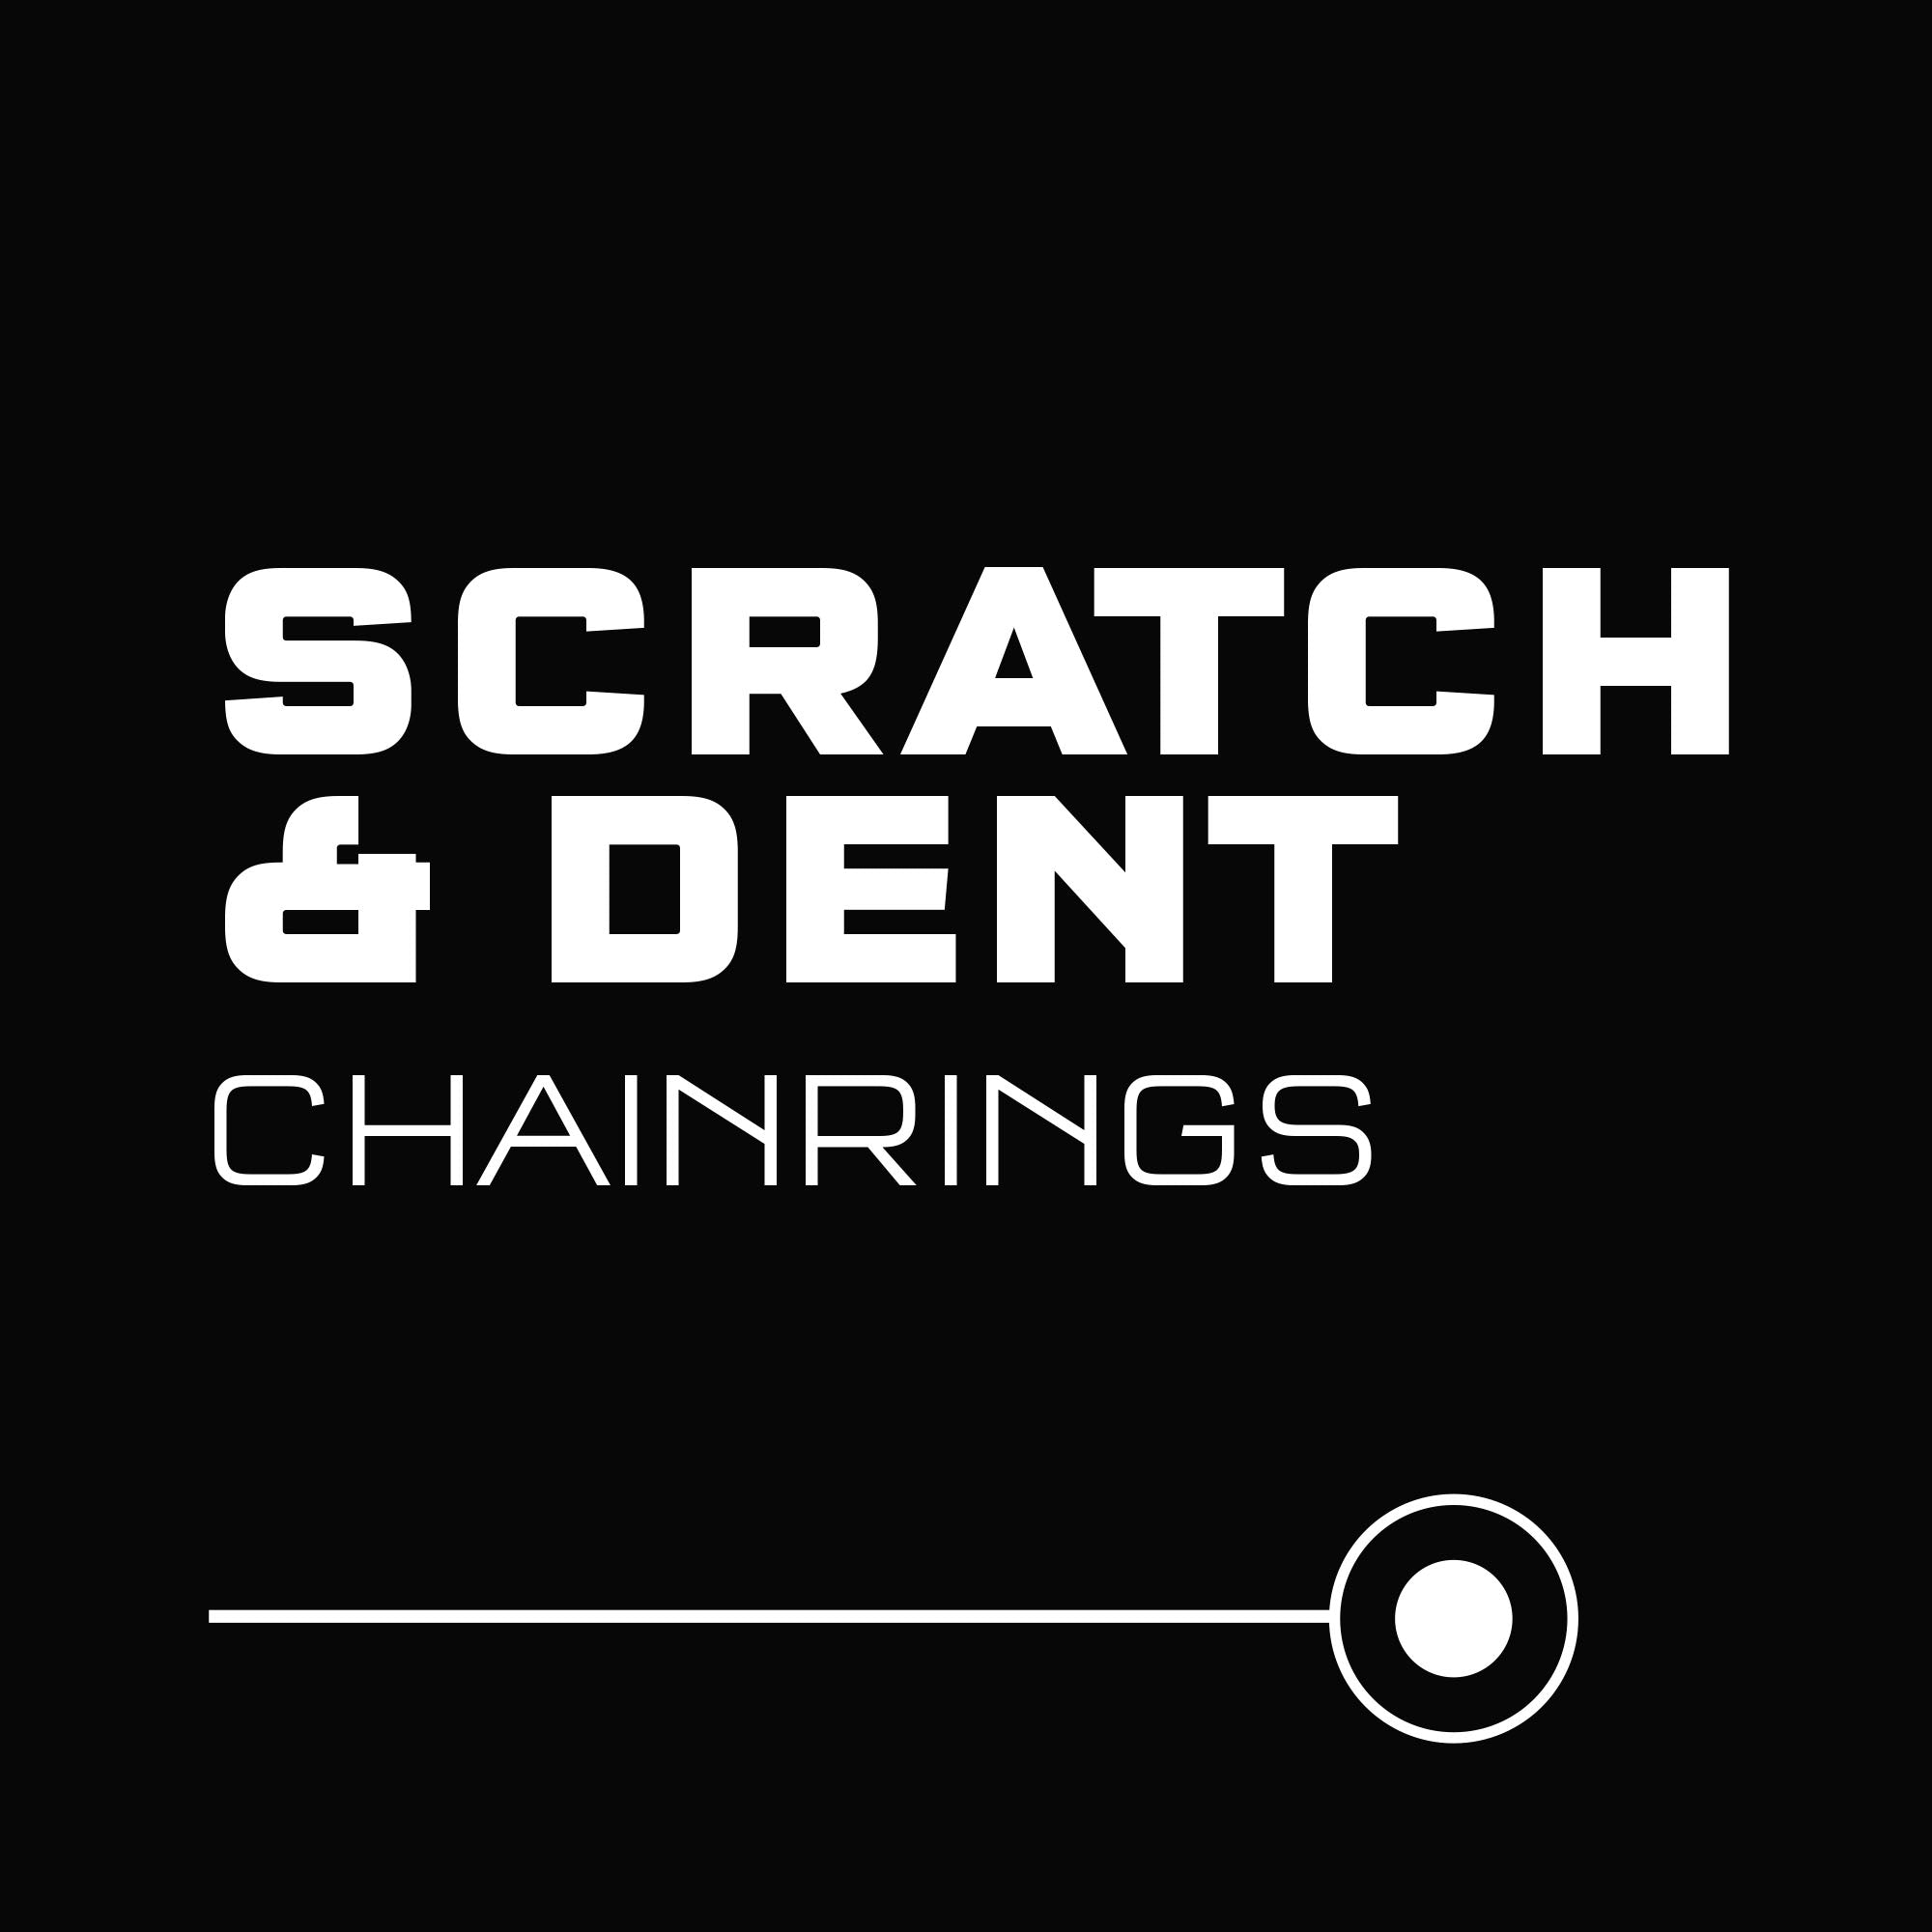 SCRATCH & DENT CHAINRINGS